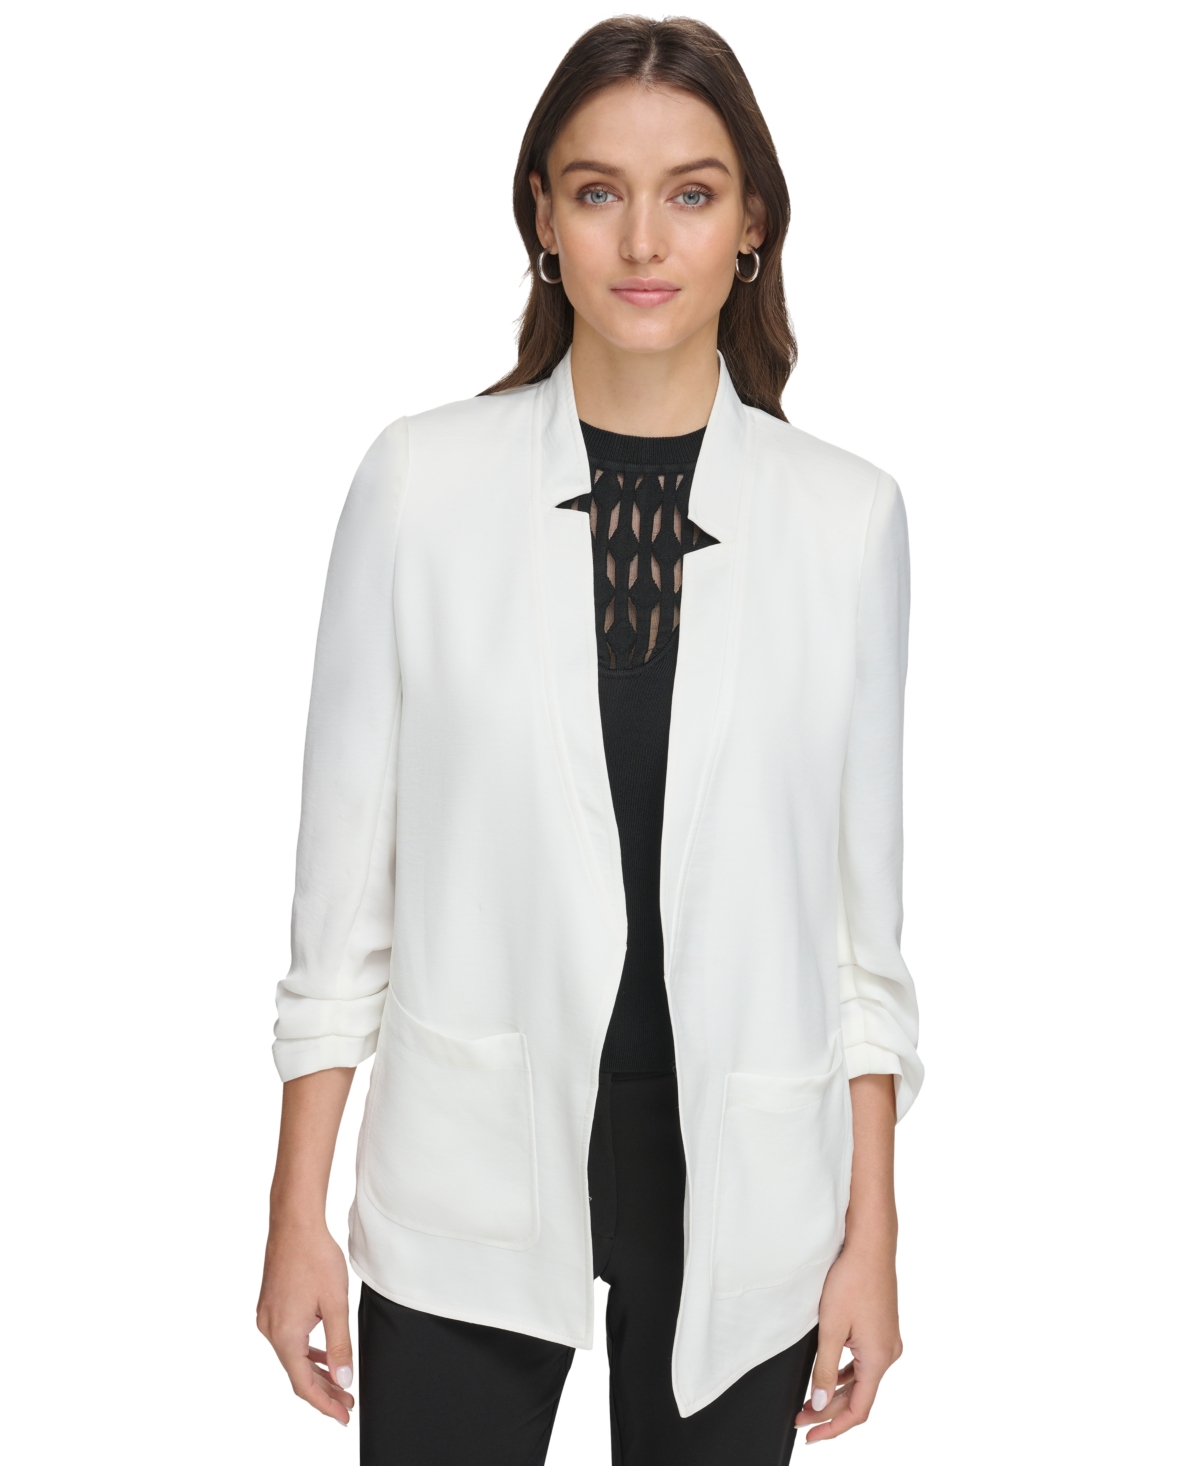 Women's Ruched-Sleeve Relaxed Jacket - Black